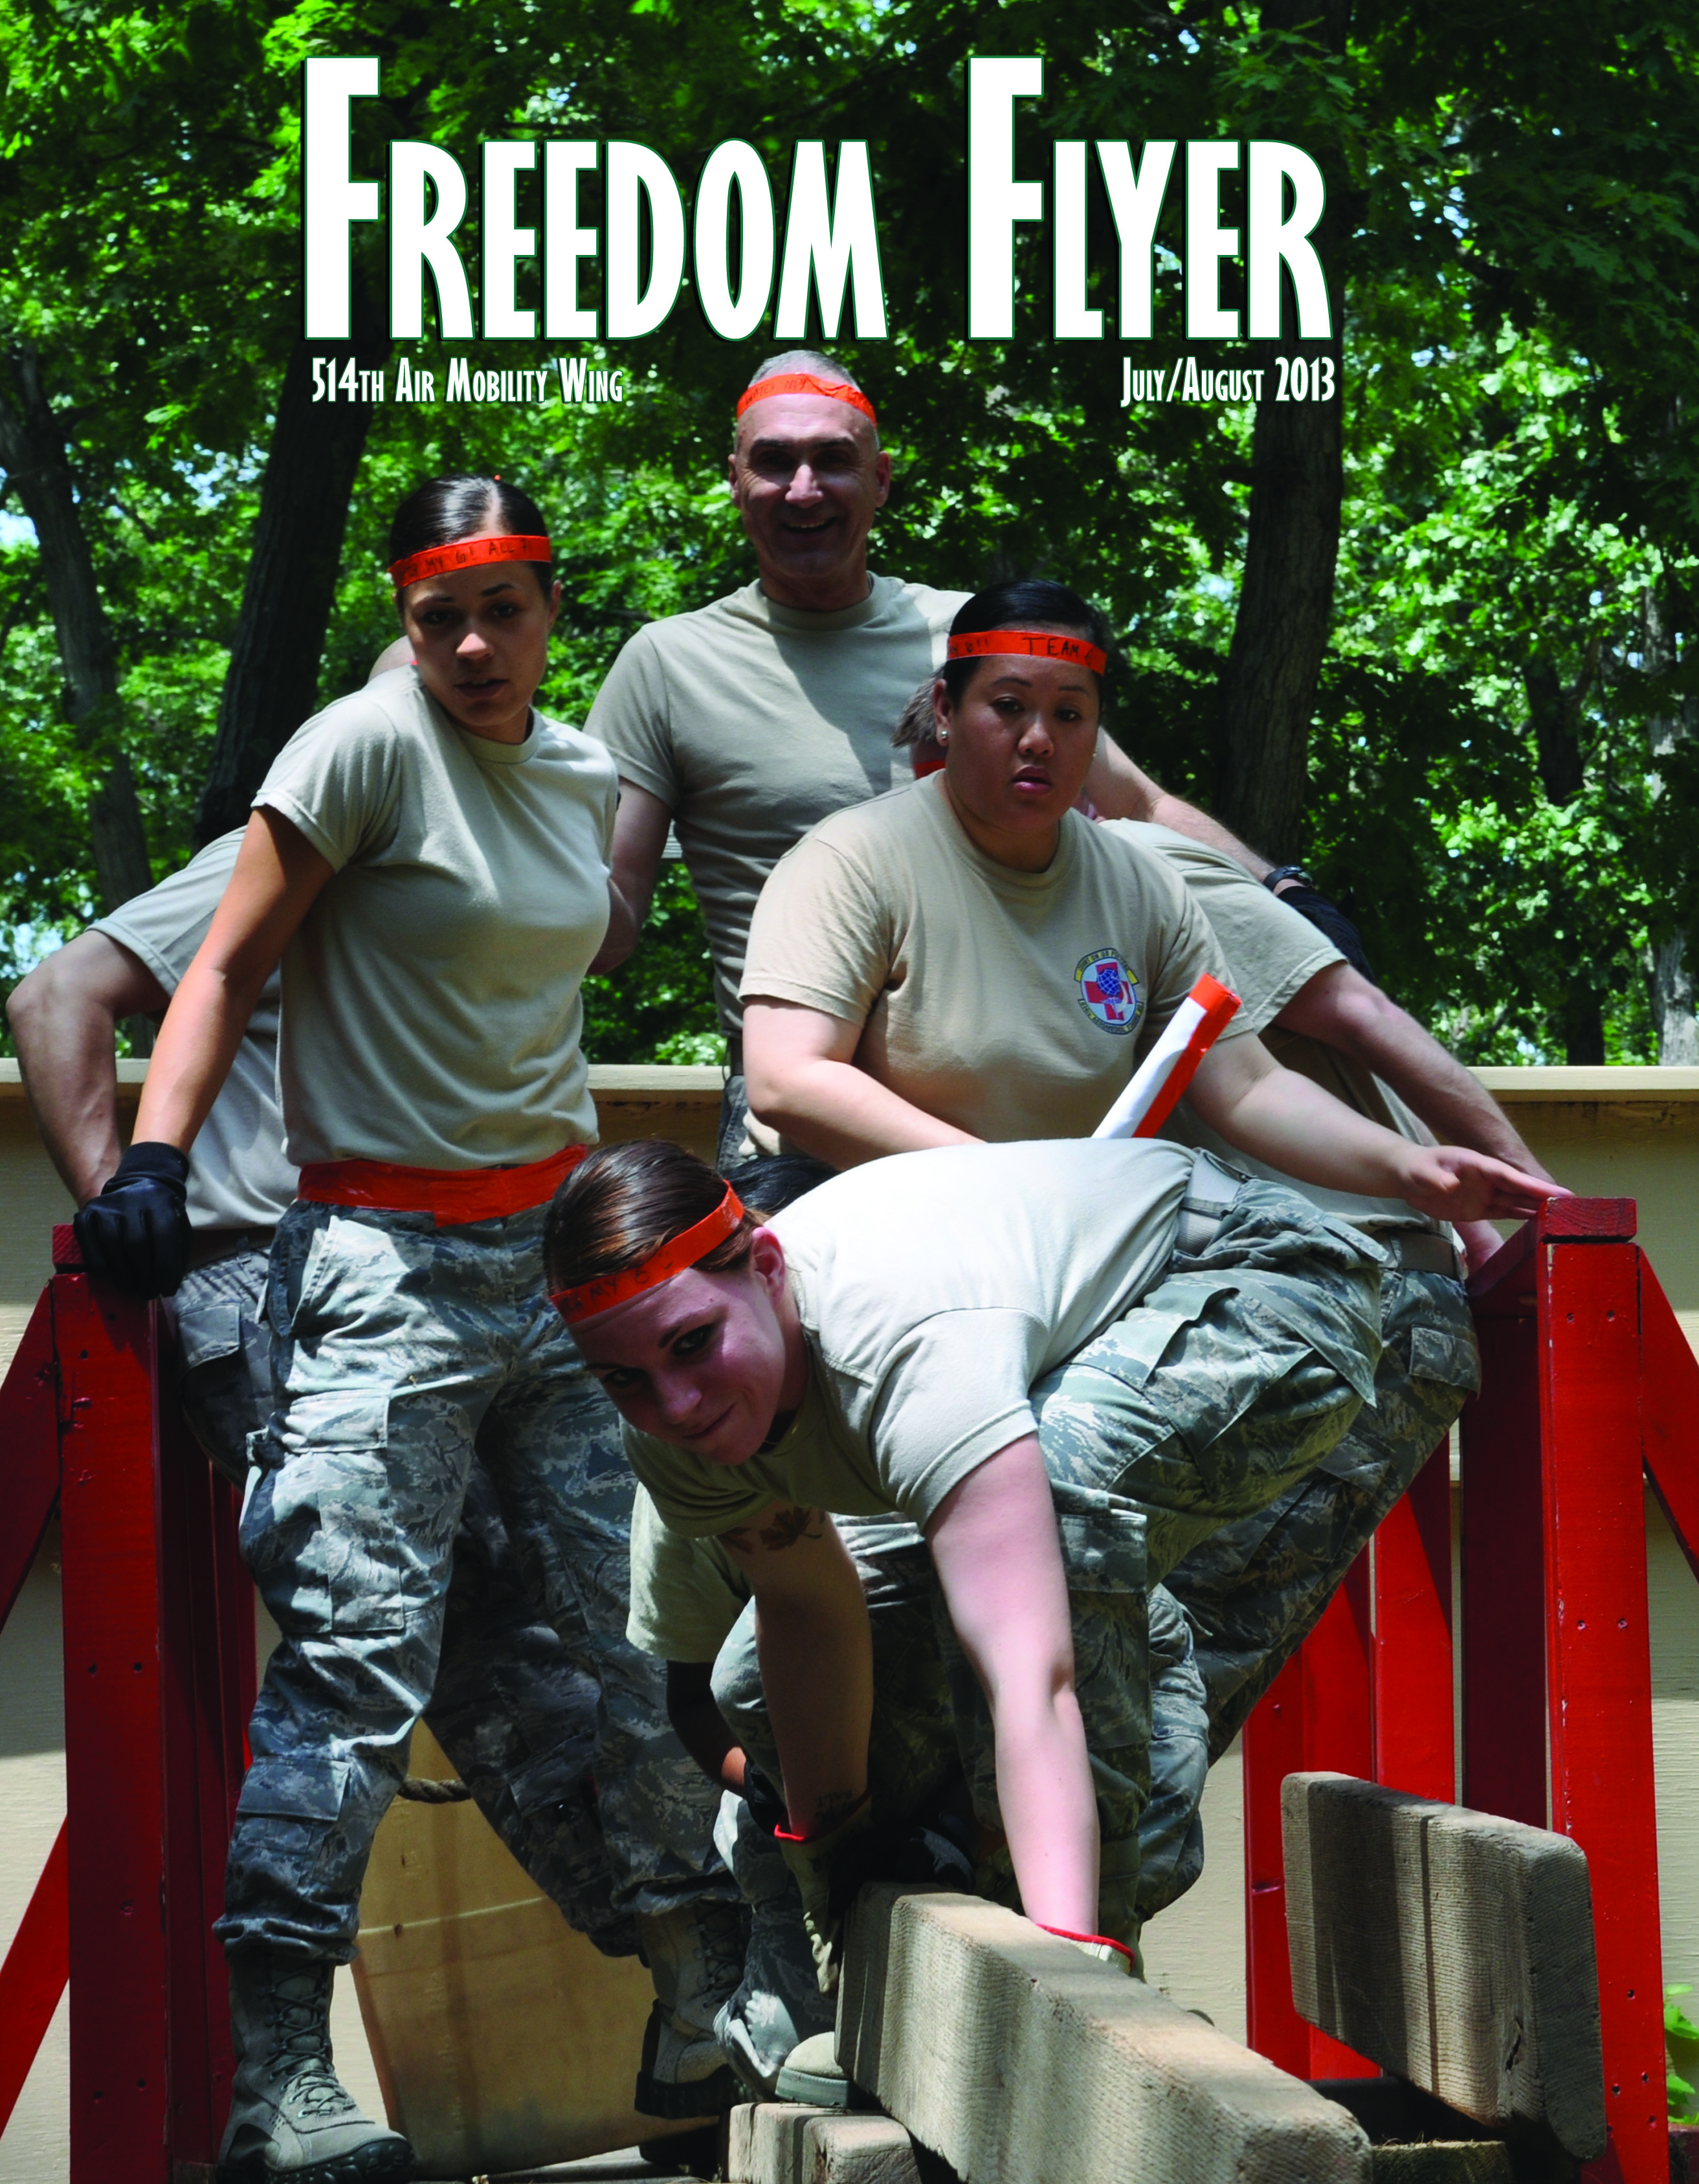 Freedom Flyer - July/August 2013